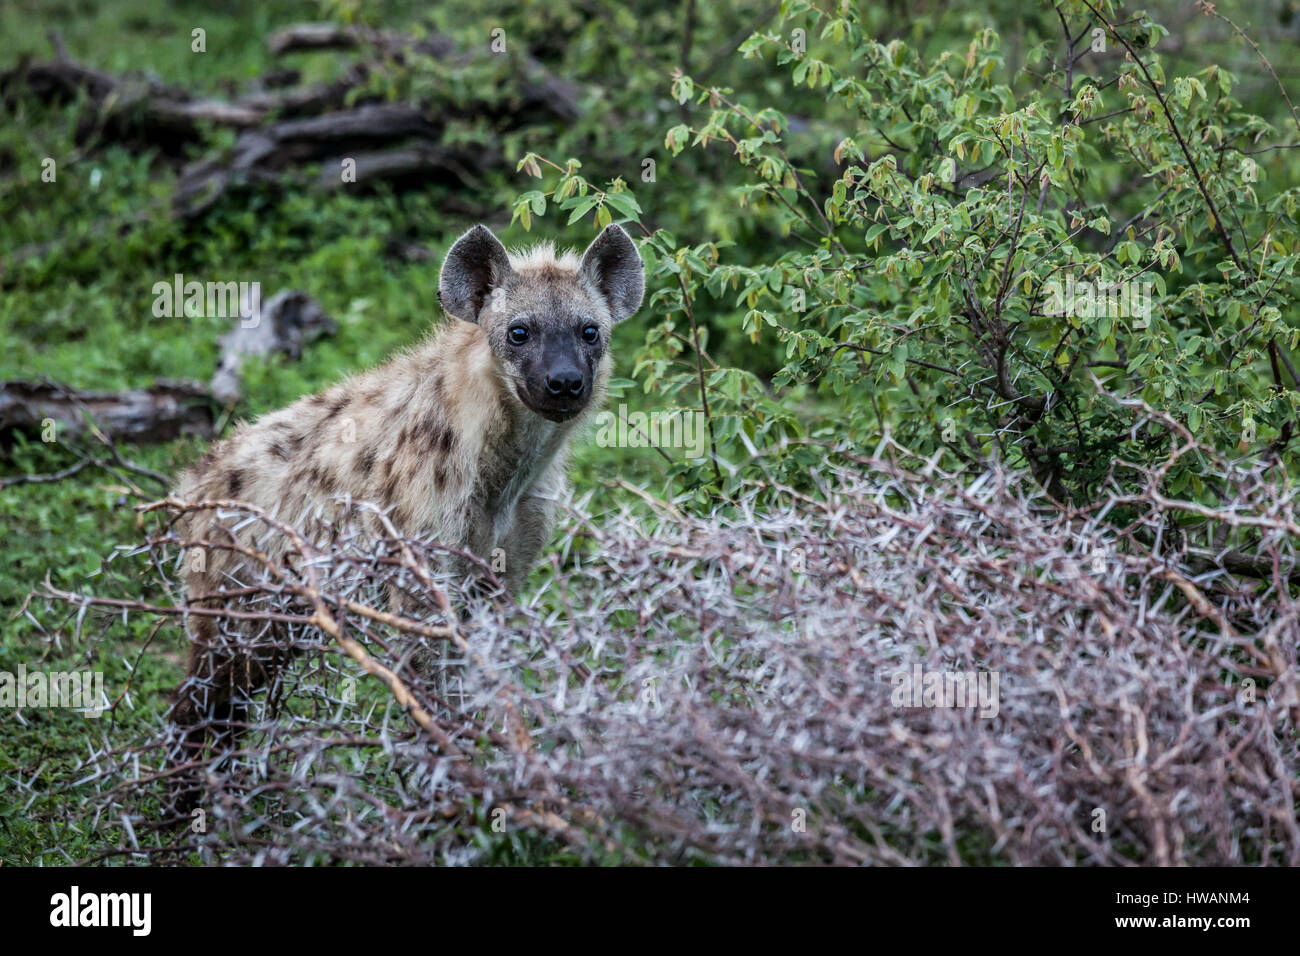 Giovani Spotted Hyena nel Parco Nazionale di Kruger, Sud Africa. Foto Stock